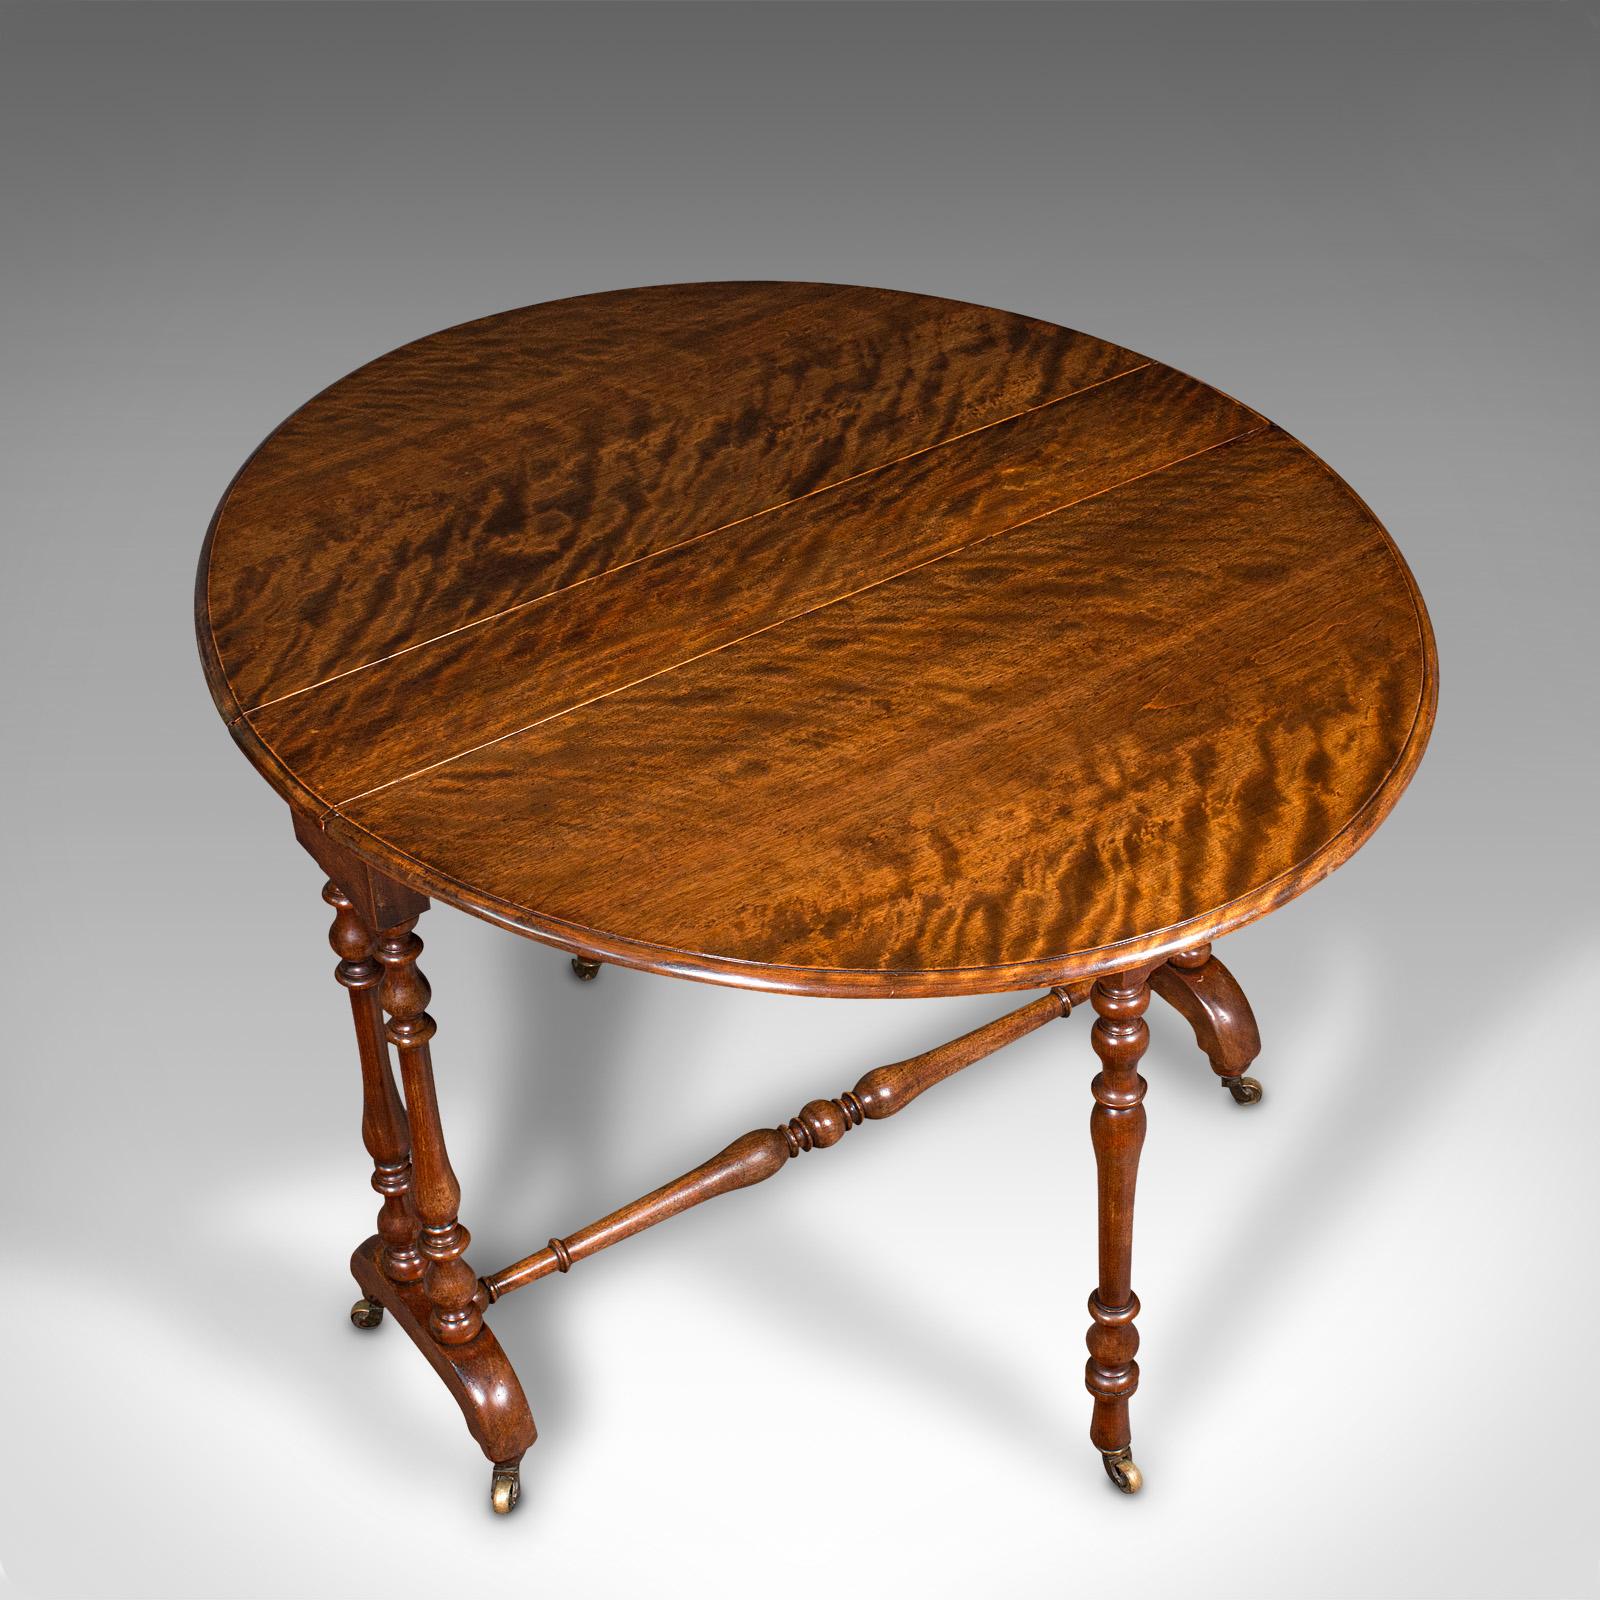 Antique Oval Sutherland Table, English, Gate Leg, Occasional, Victorian, C.1850 For Sale 3